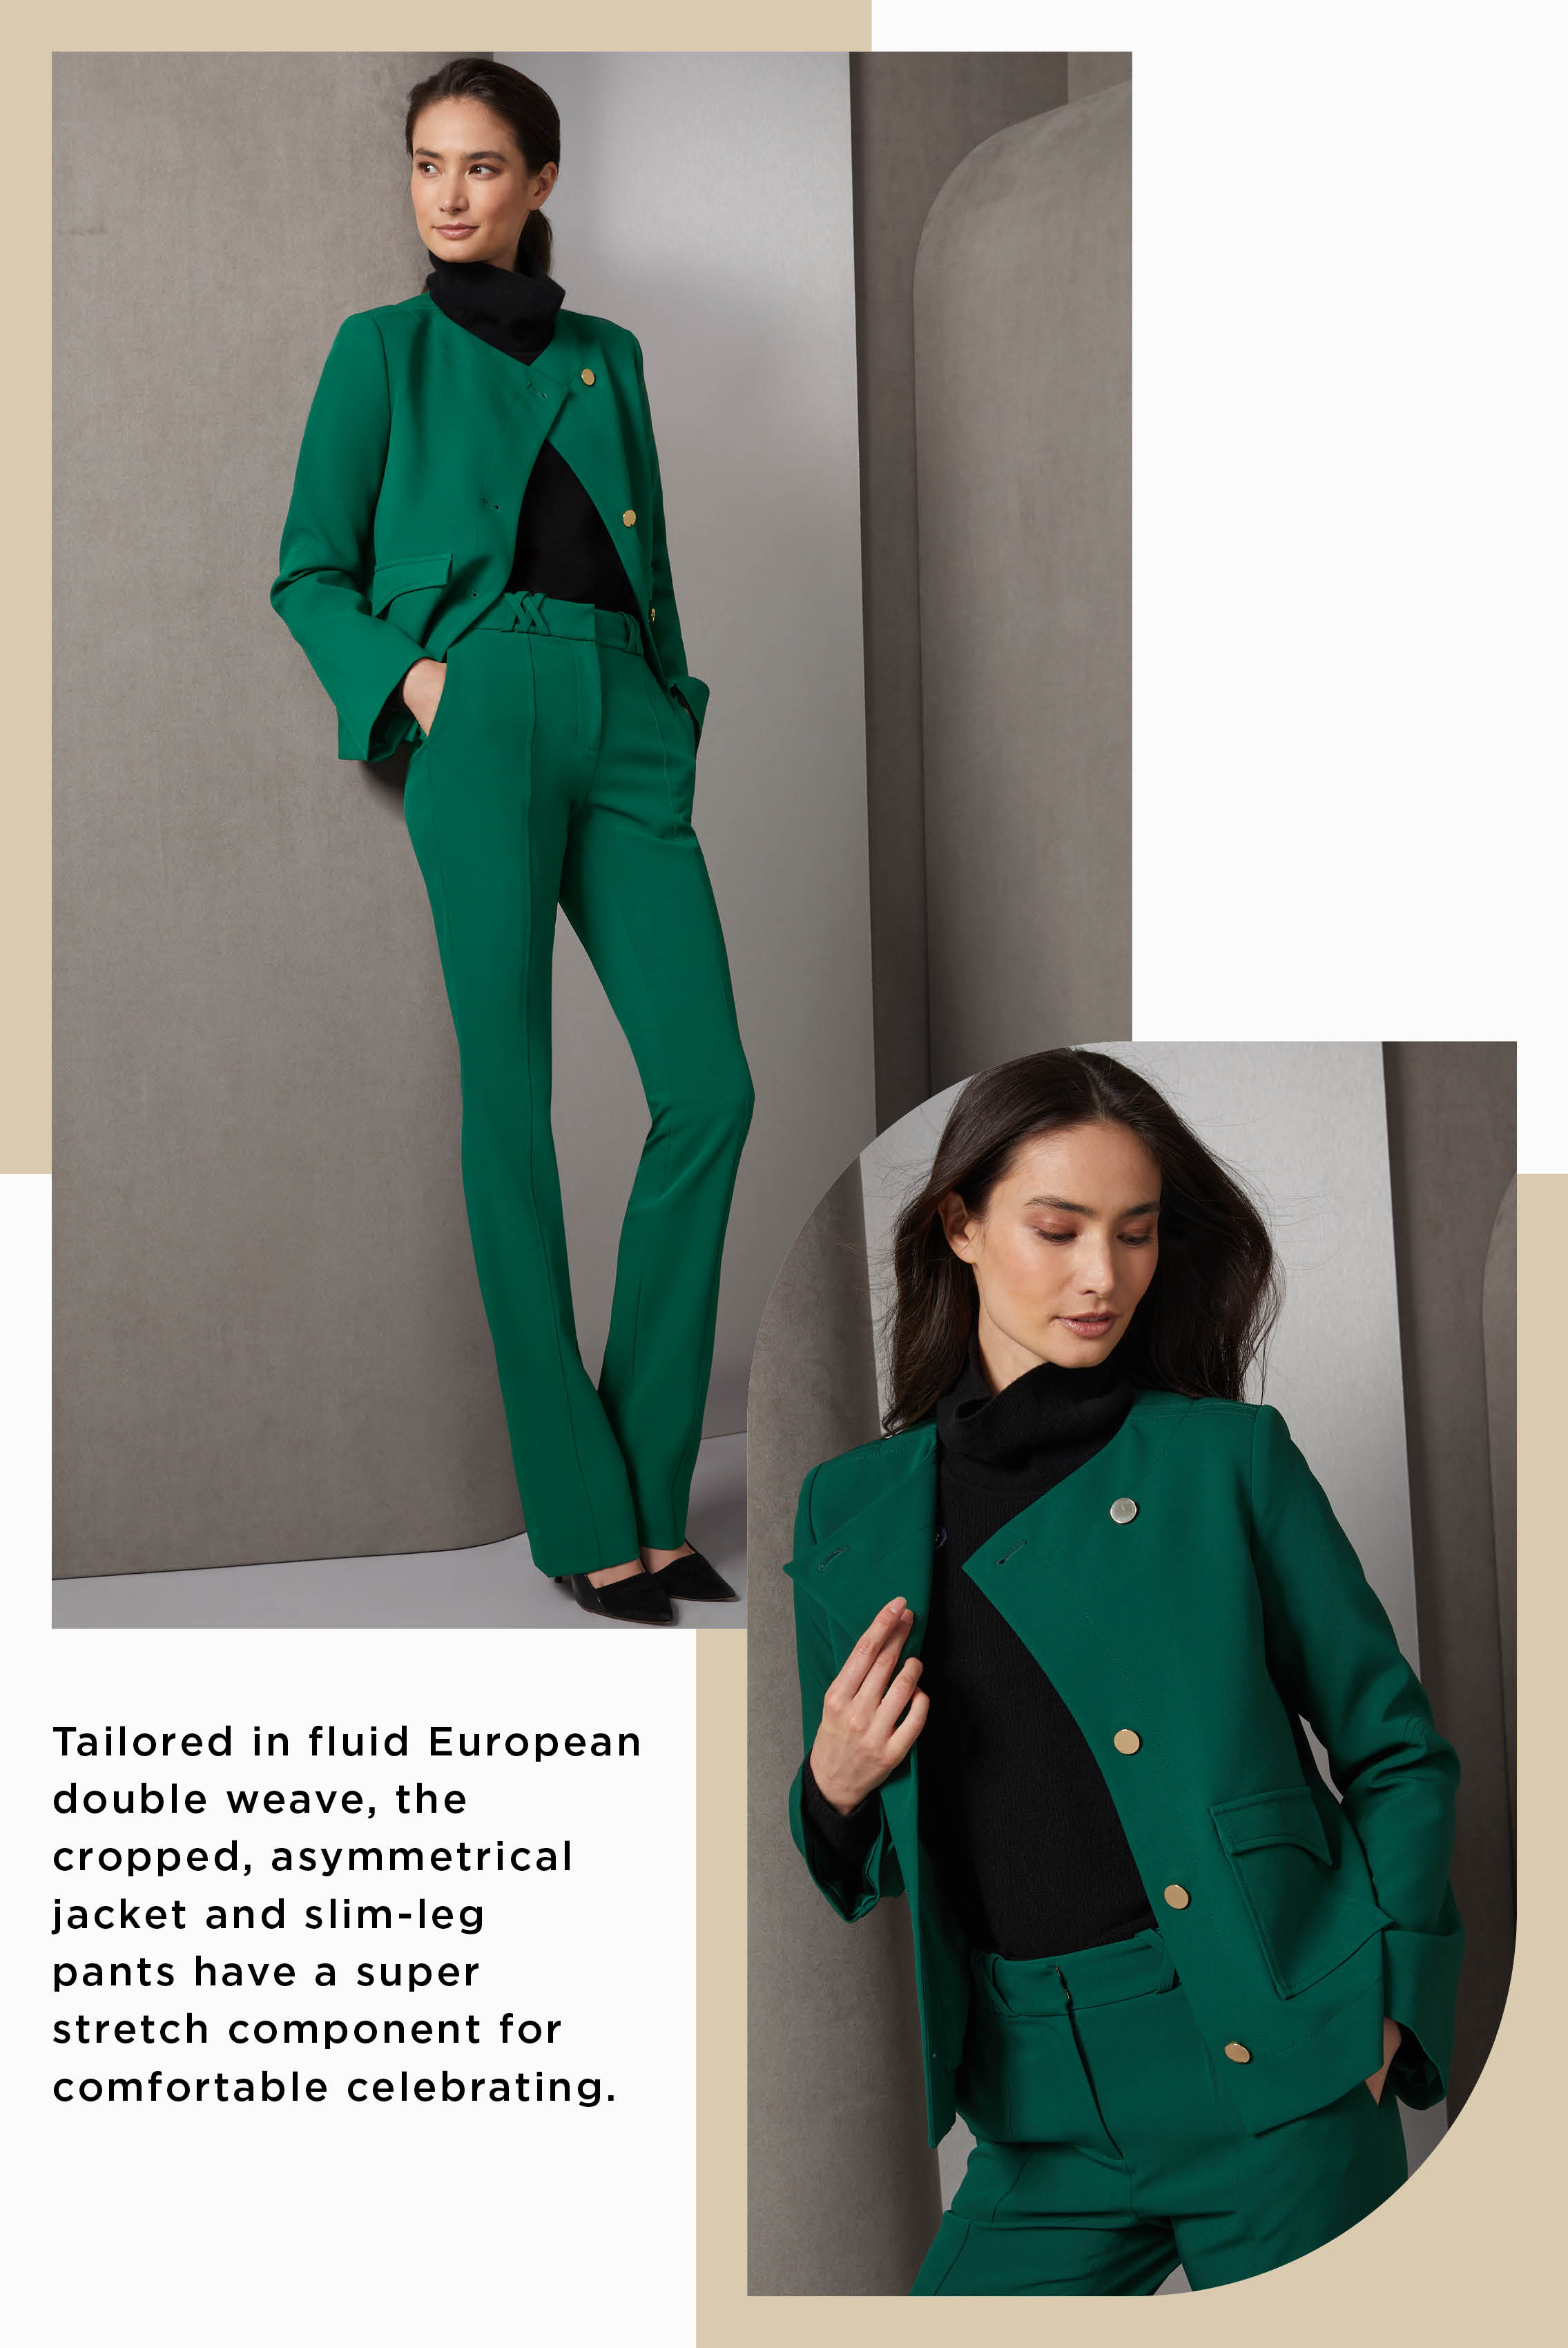 This classic suit dresses up the holidays in alpine green. Tailored in fluid European double weave, the cropped, asymmetrical jacket and slim-leg pants have a super stretch component for comfortable celebrating.